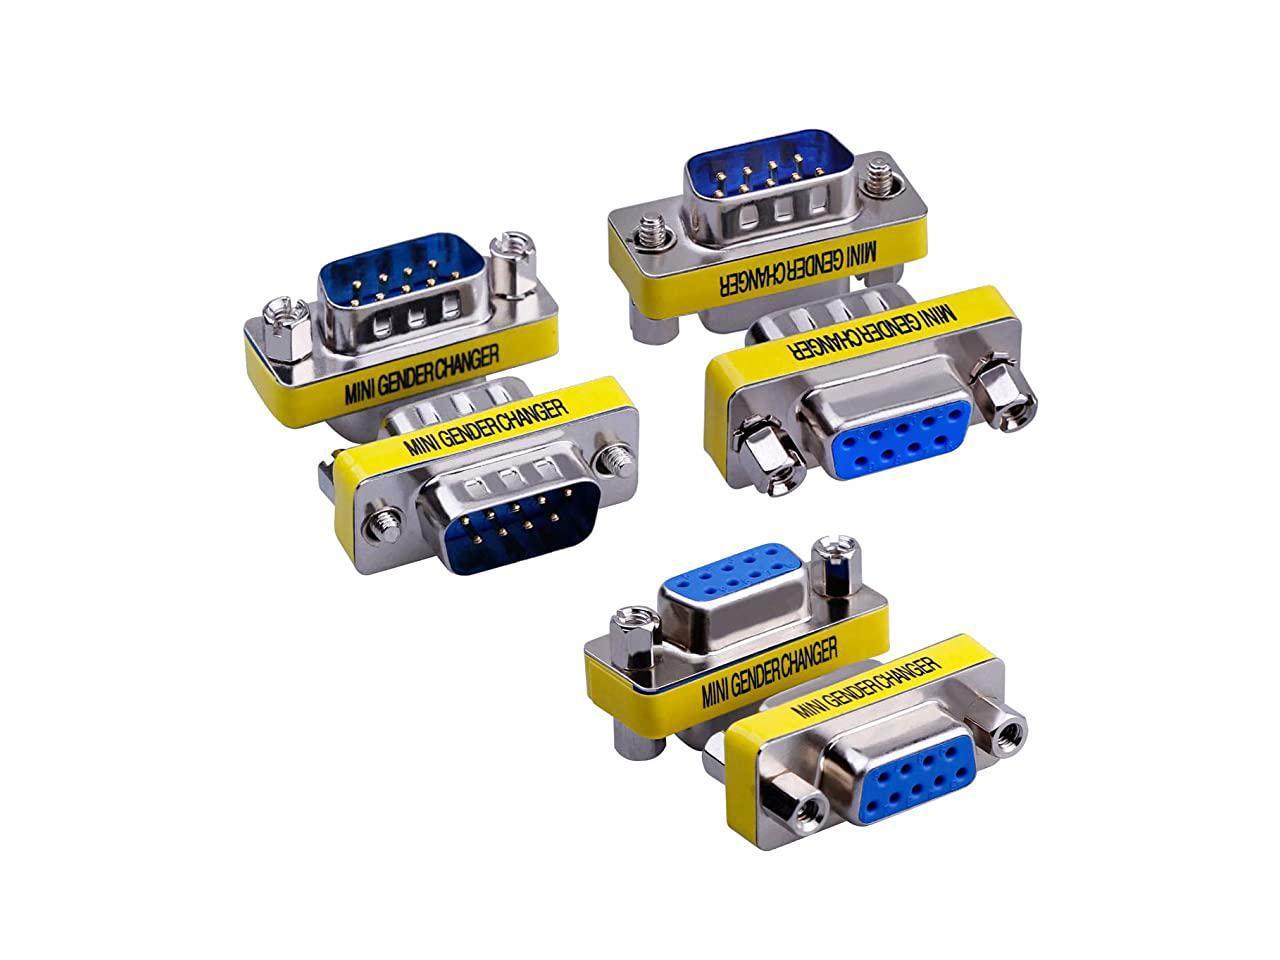 Computer Cables 9 Pin RS-232 DB9 Male to Male Serial Cable Gender Changer Coupler AdapterHot Cable Length: Other 